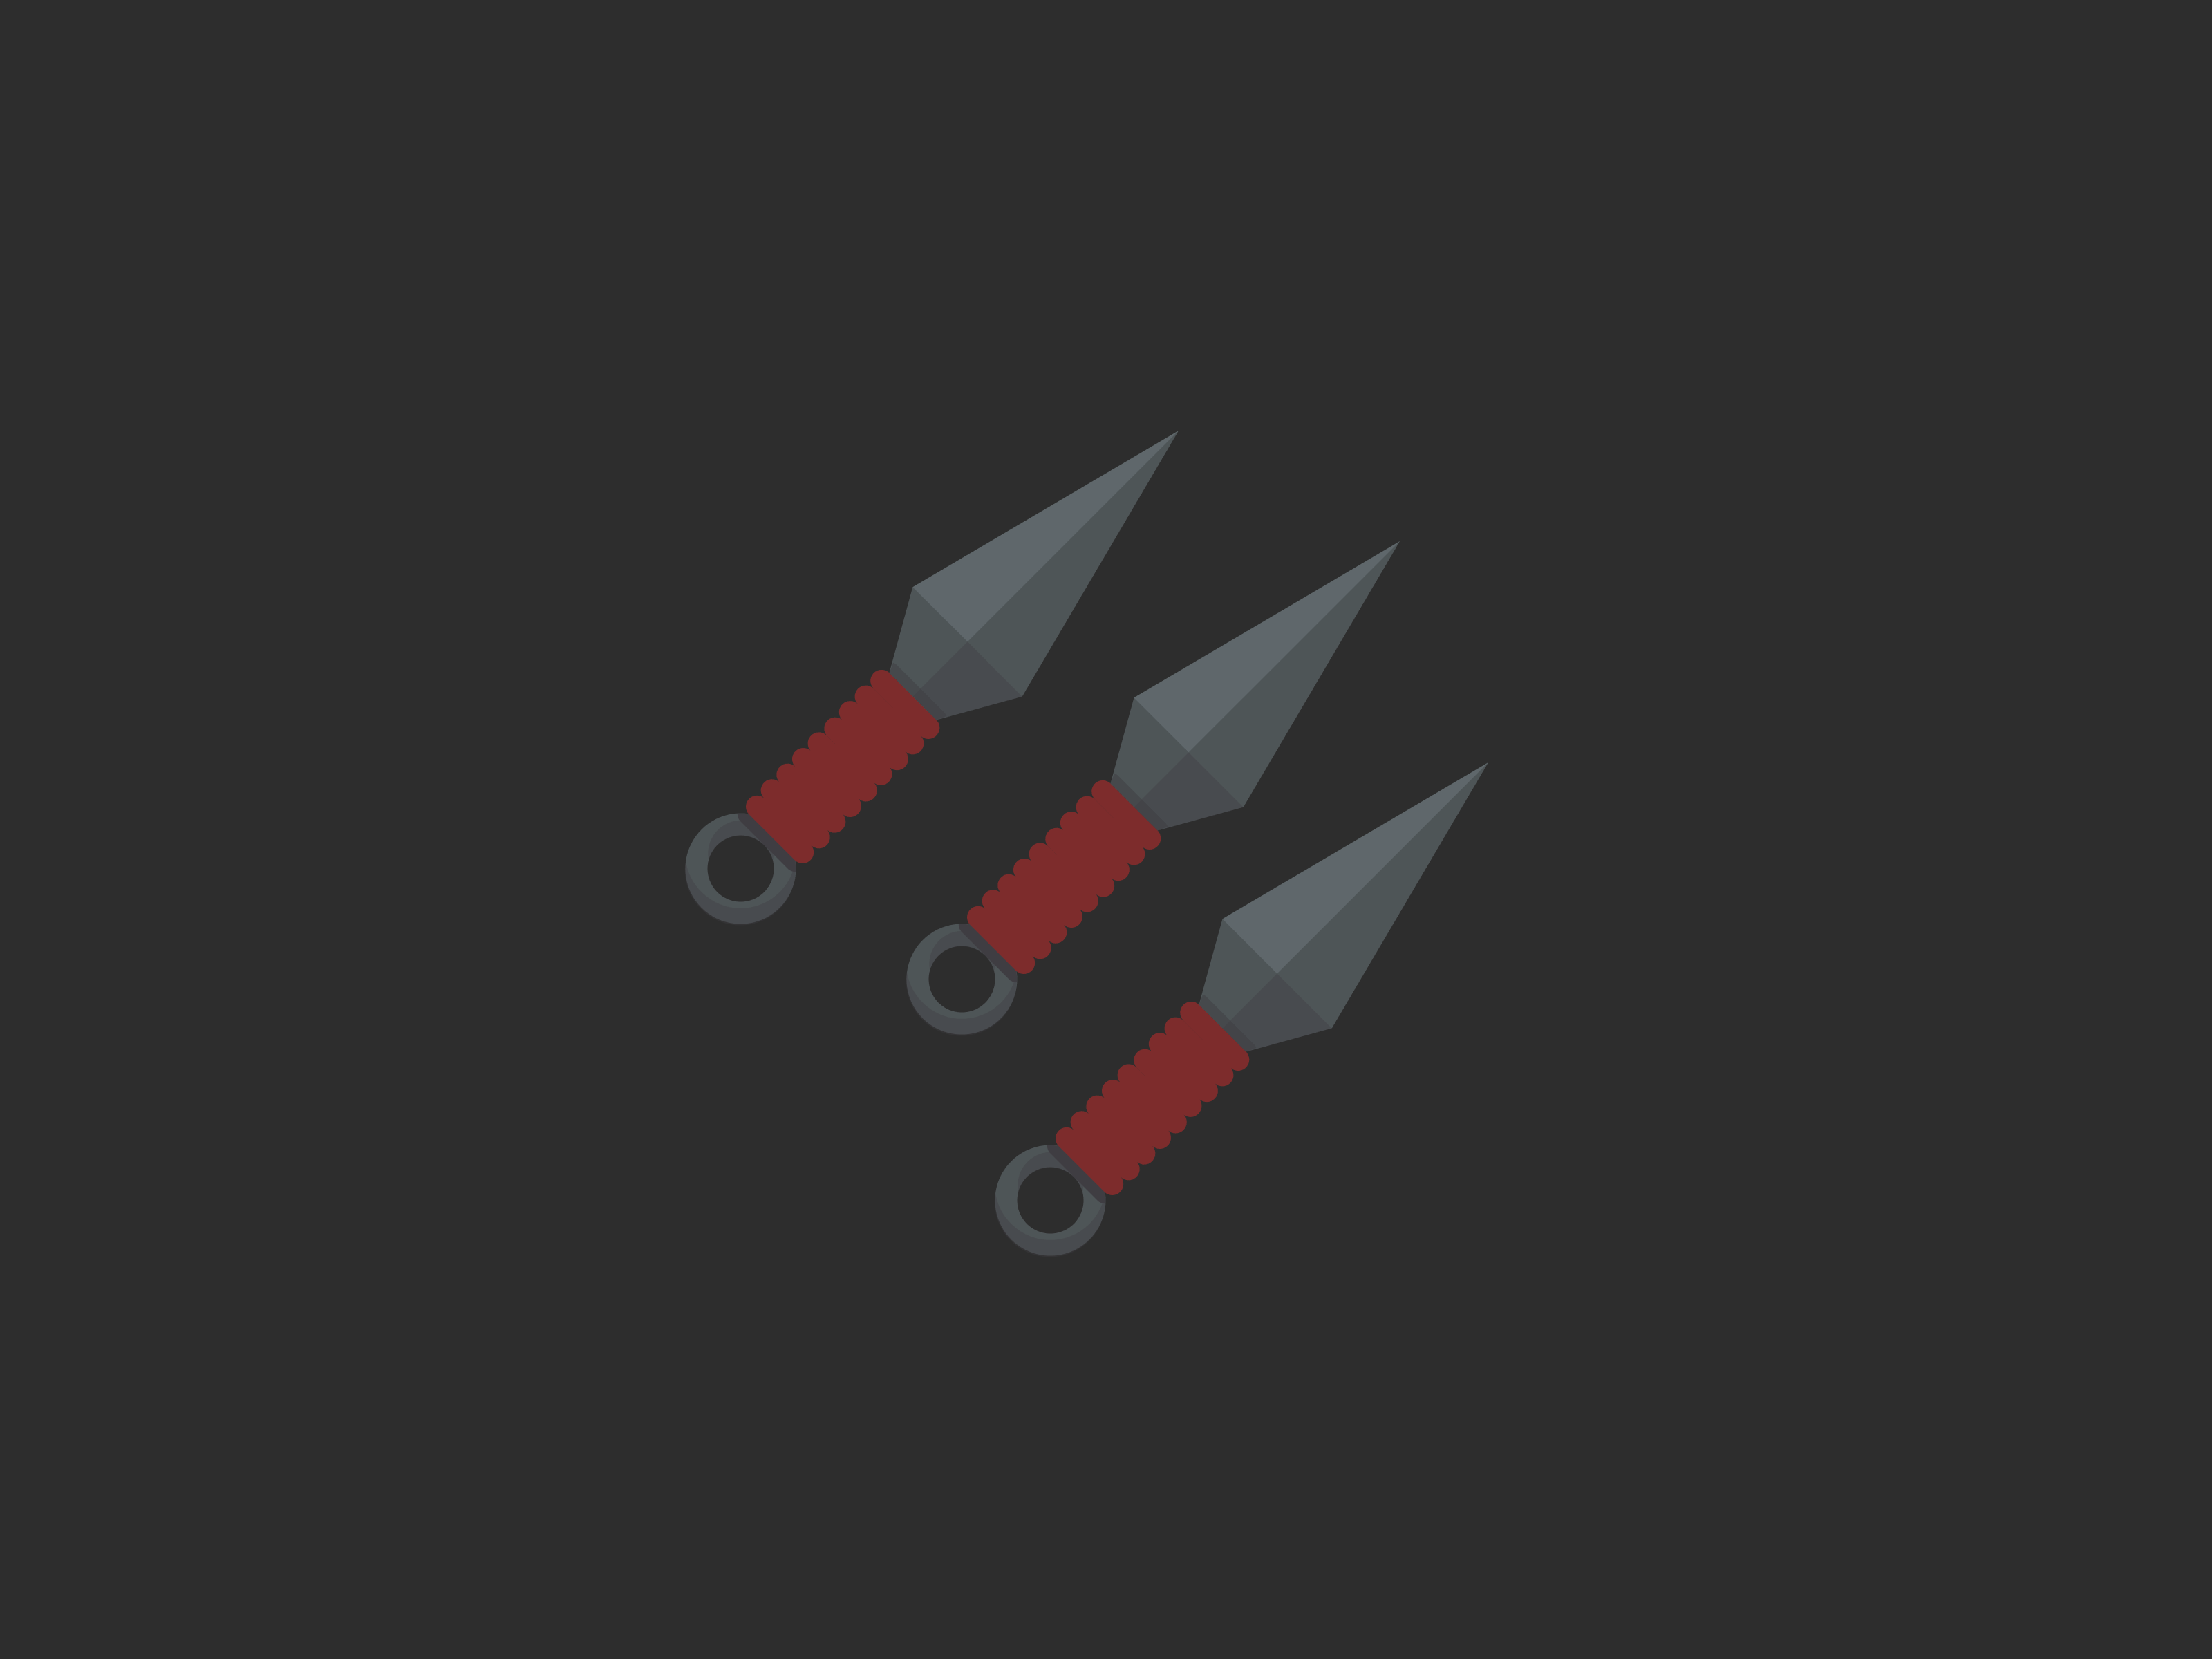 Weapon(s) of choice. design game asset game icons graphic design icon design icons iconset illustration rpg items vector weapons